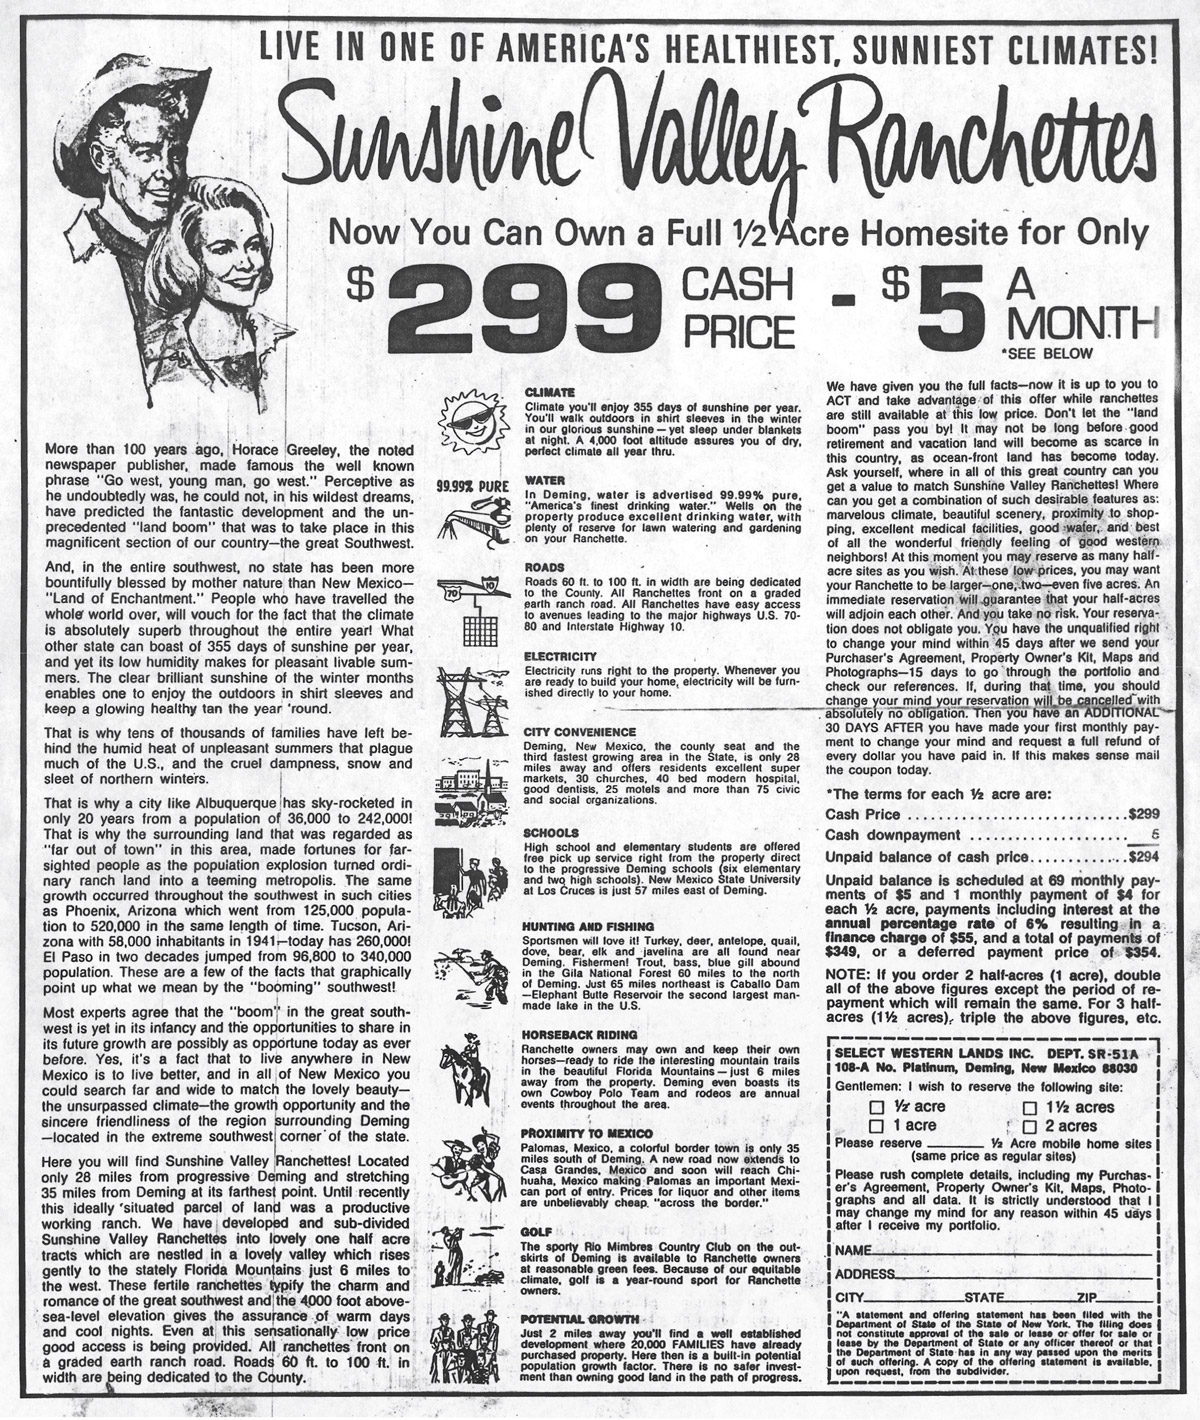 1960s real estate development advertisement in a midwestern newspaper, advertising amenities that are still nowhere to be found.